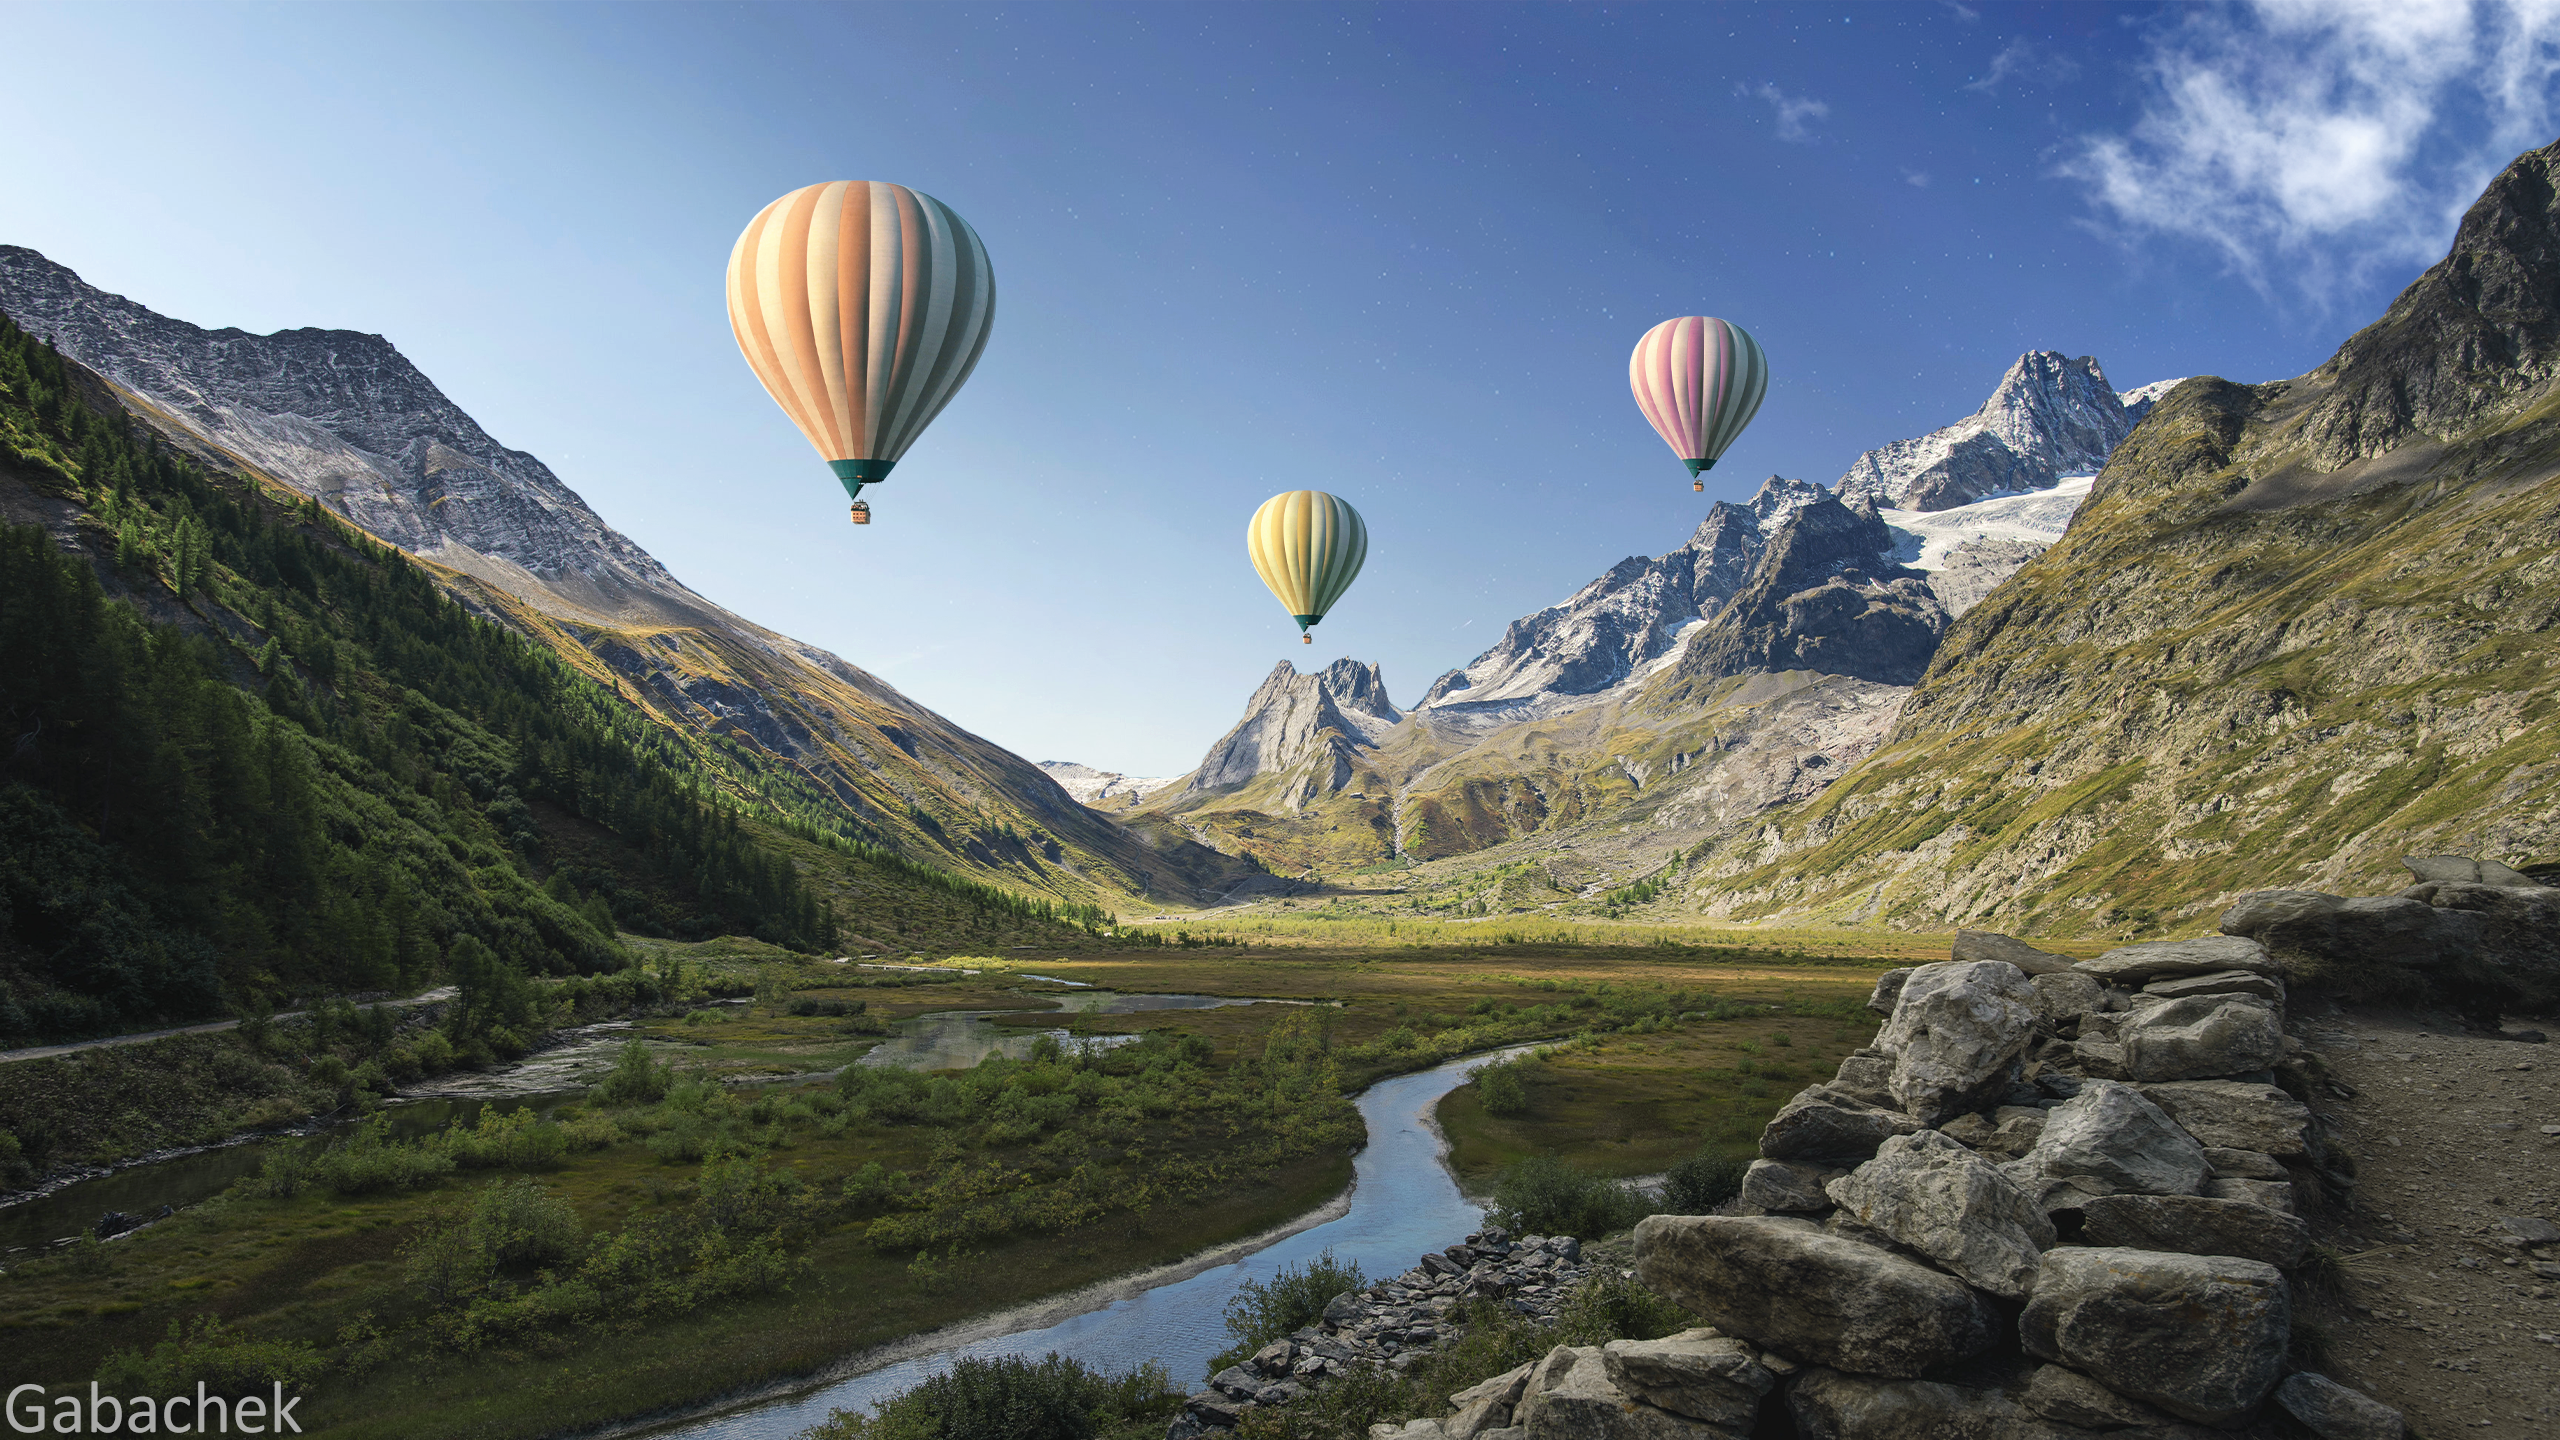 Gabachek Hot Air Balloons Mountains Gorge Landscape Sky Clouds Stars River Stones Nature Forest Phot 2560x1440